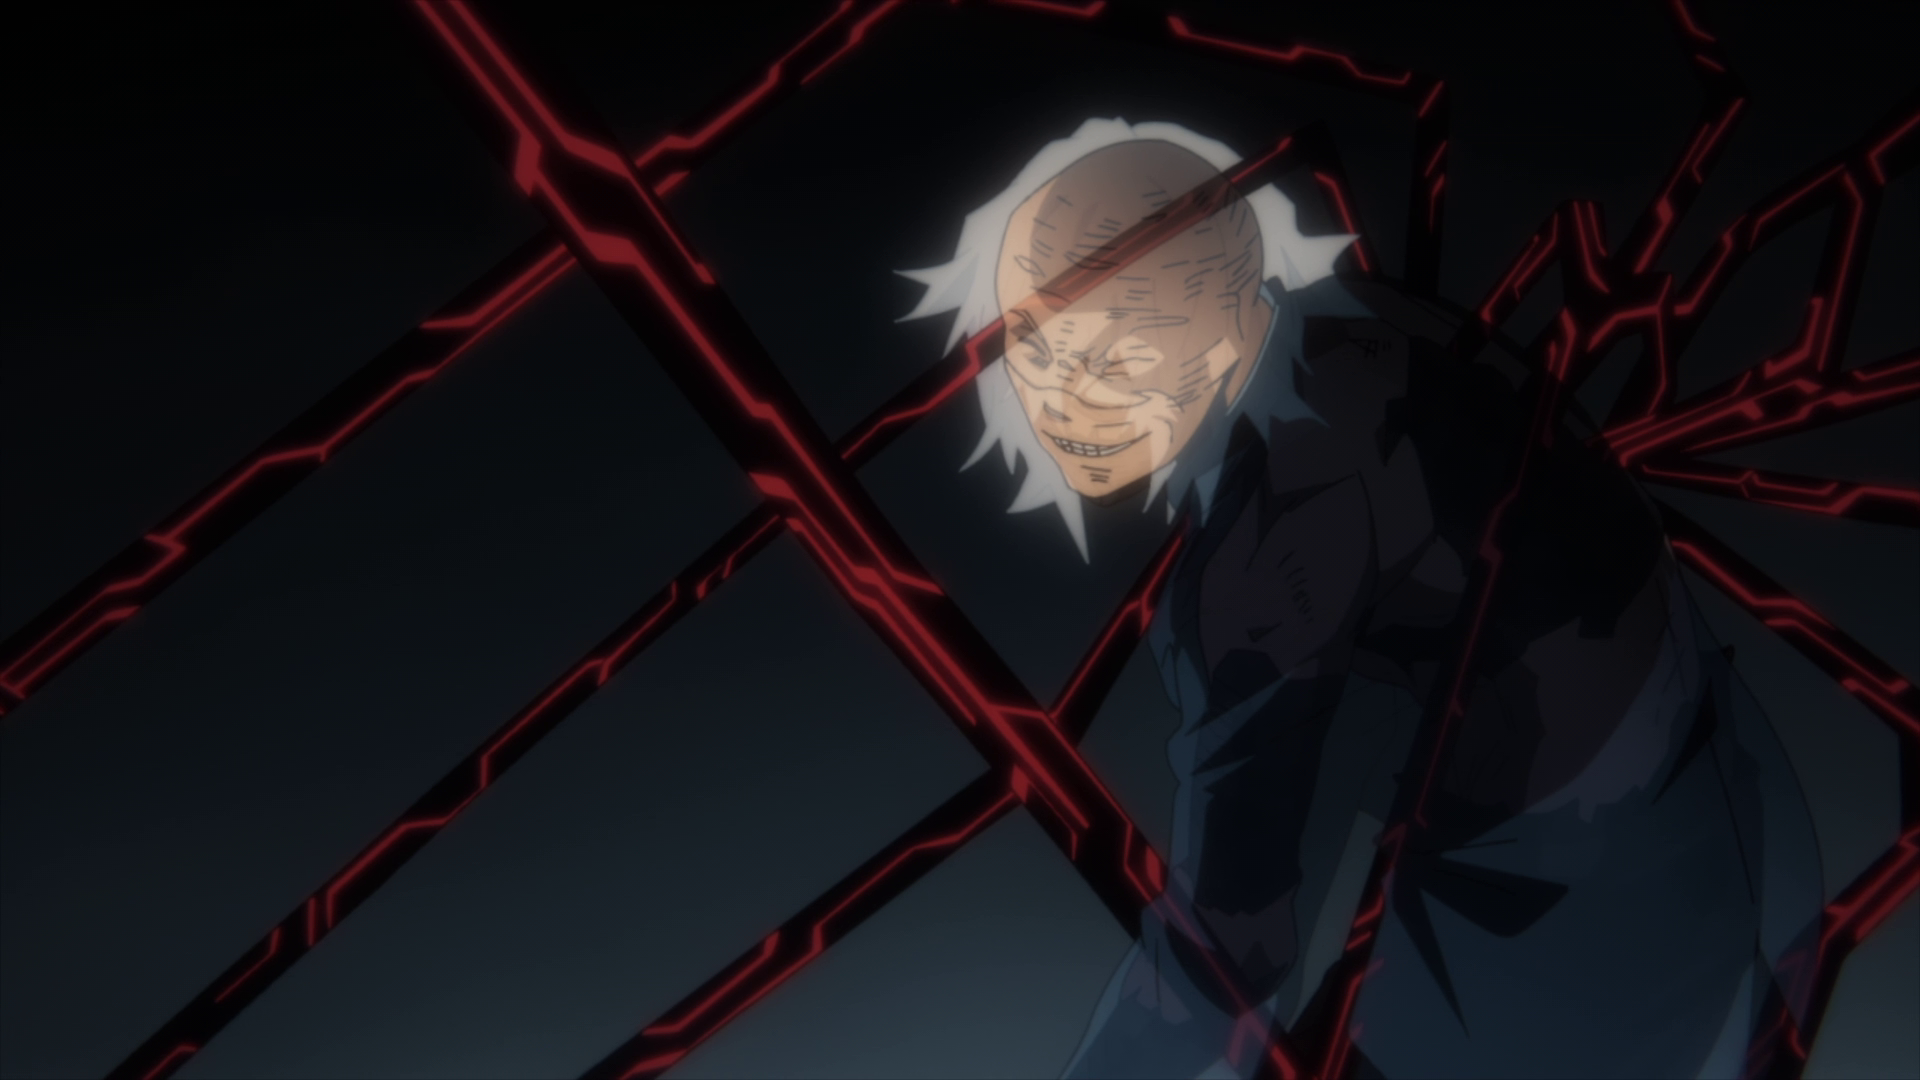 Why do you think Tokyo Ghoul: re anime is skipping, compressing